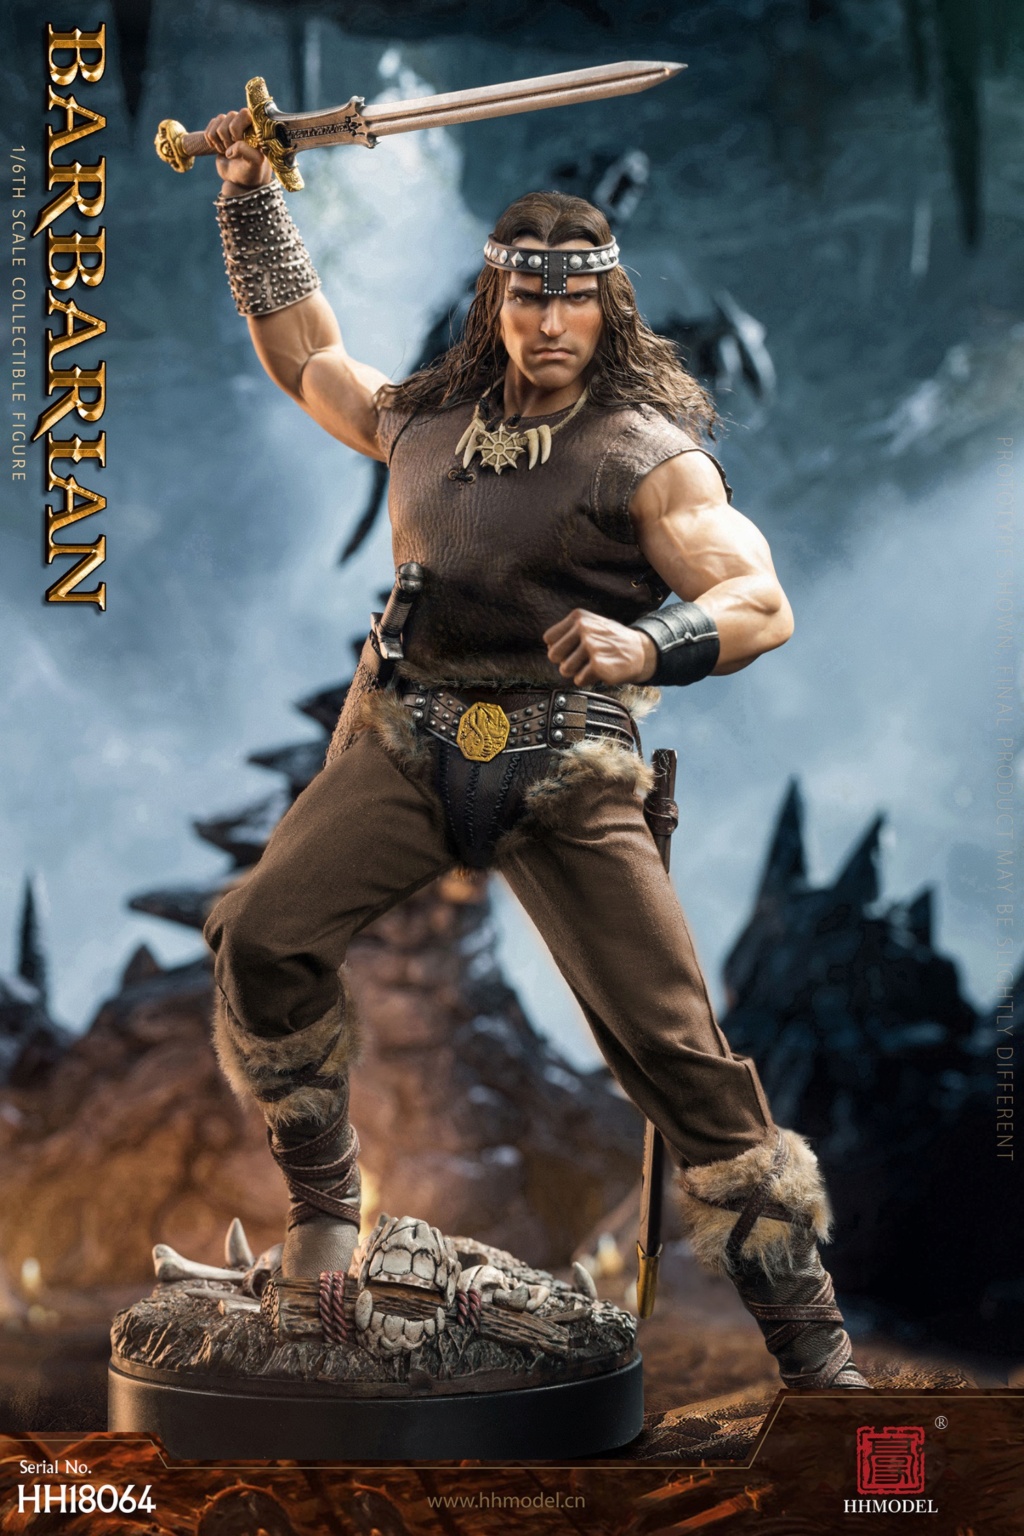 movie-based - NEW PRODUCT: Haoyutoys: HH18064 1/6 Scale The Barbarian 18002110